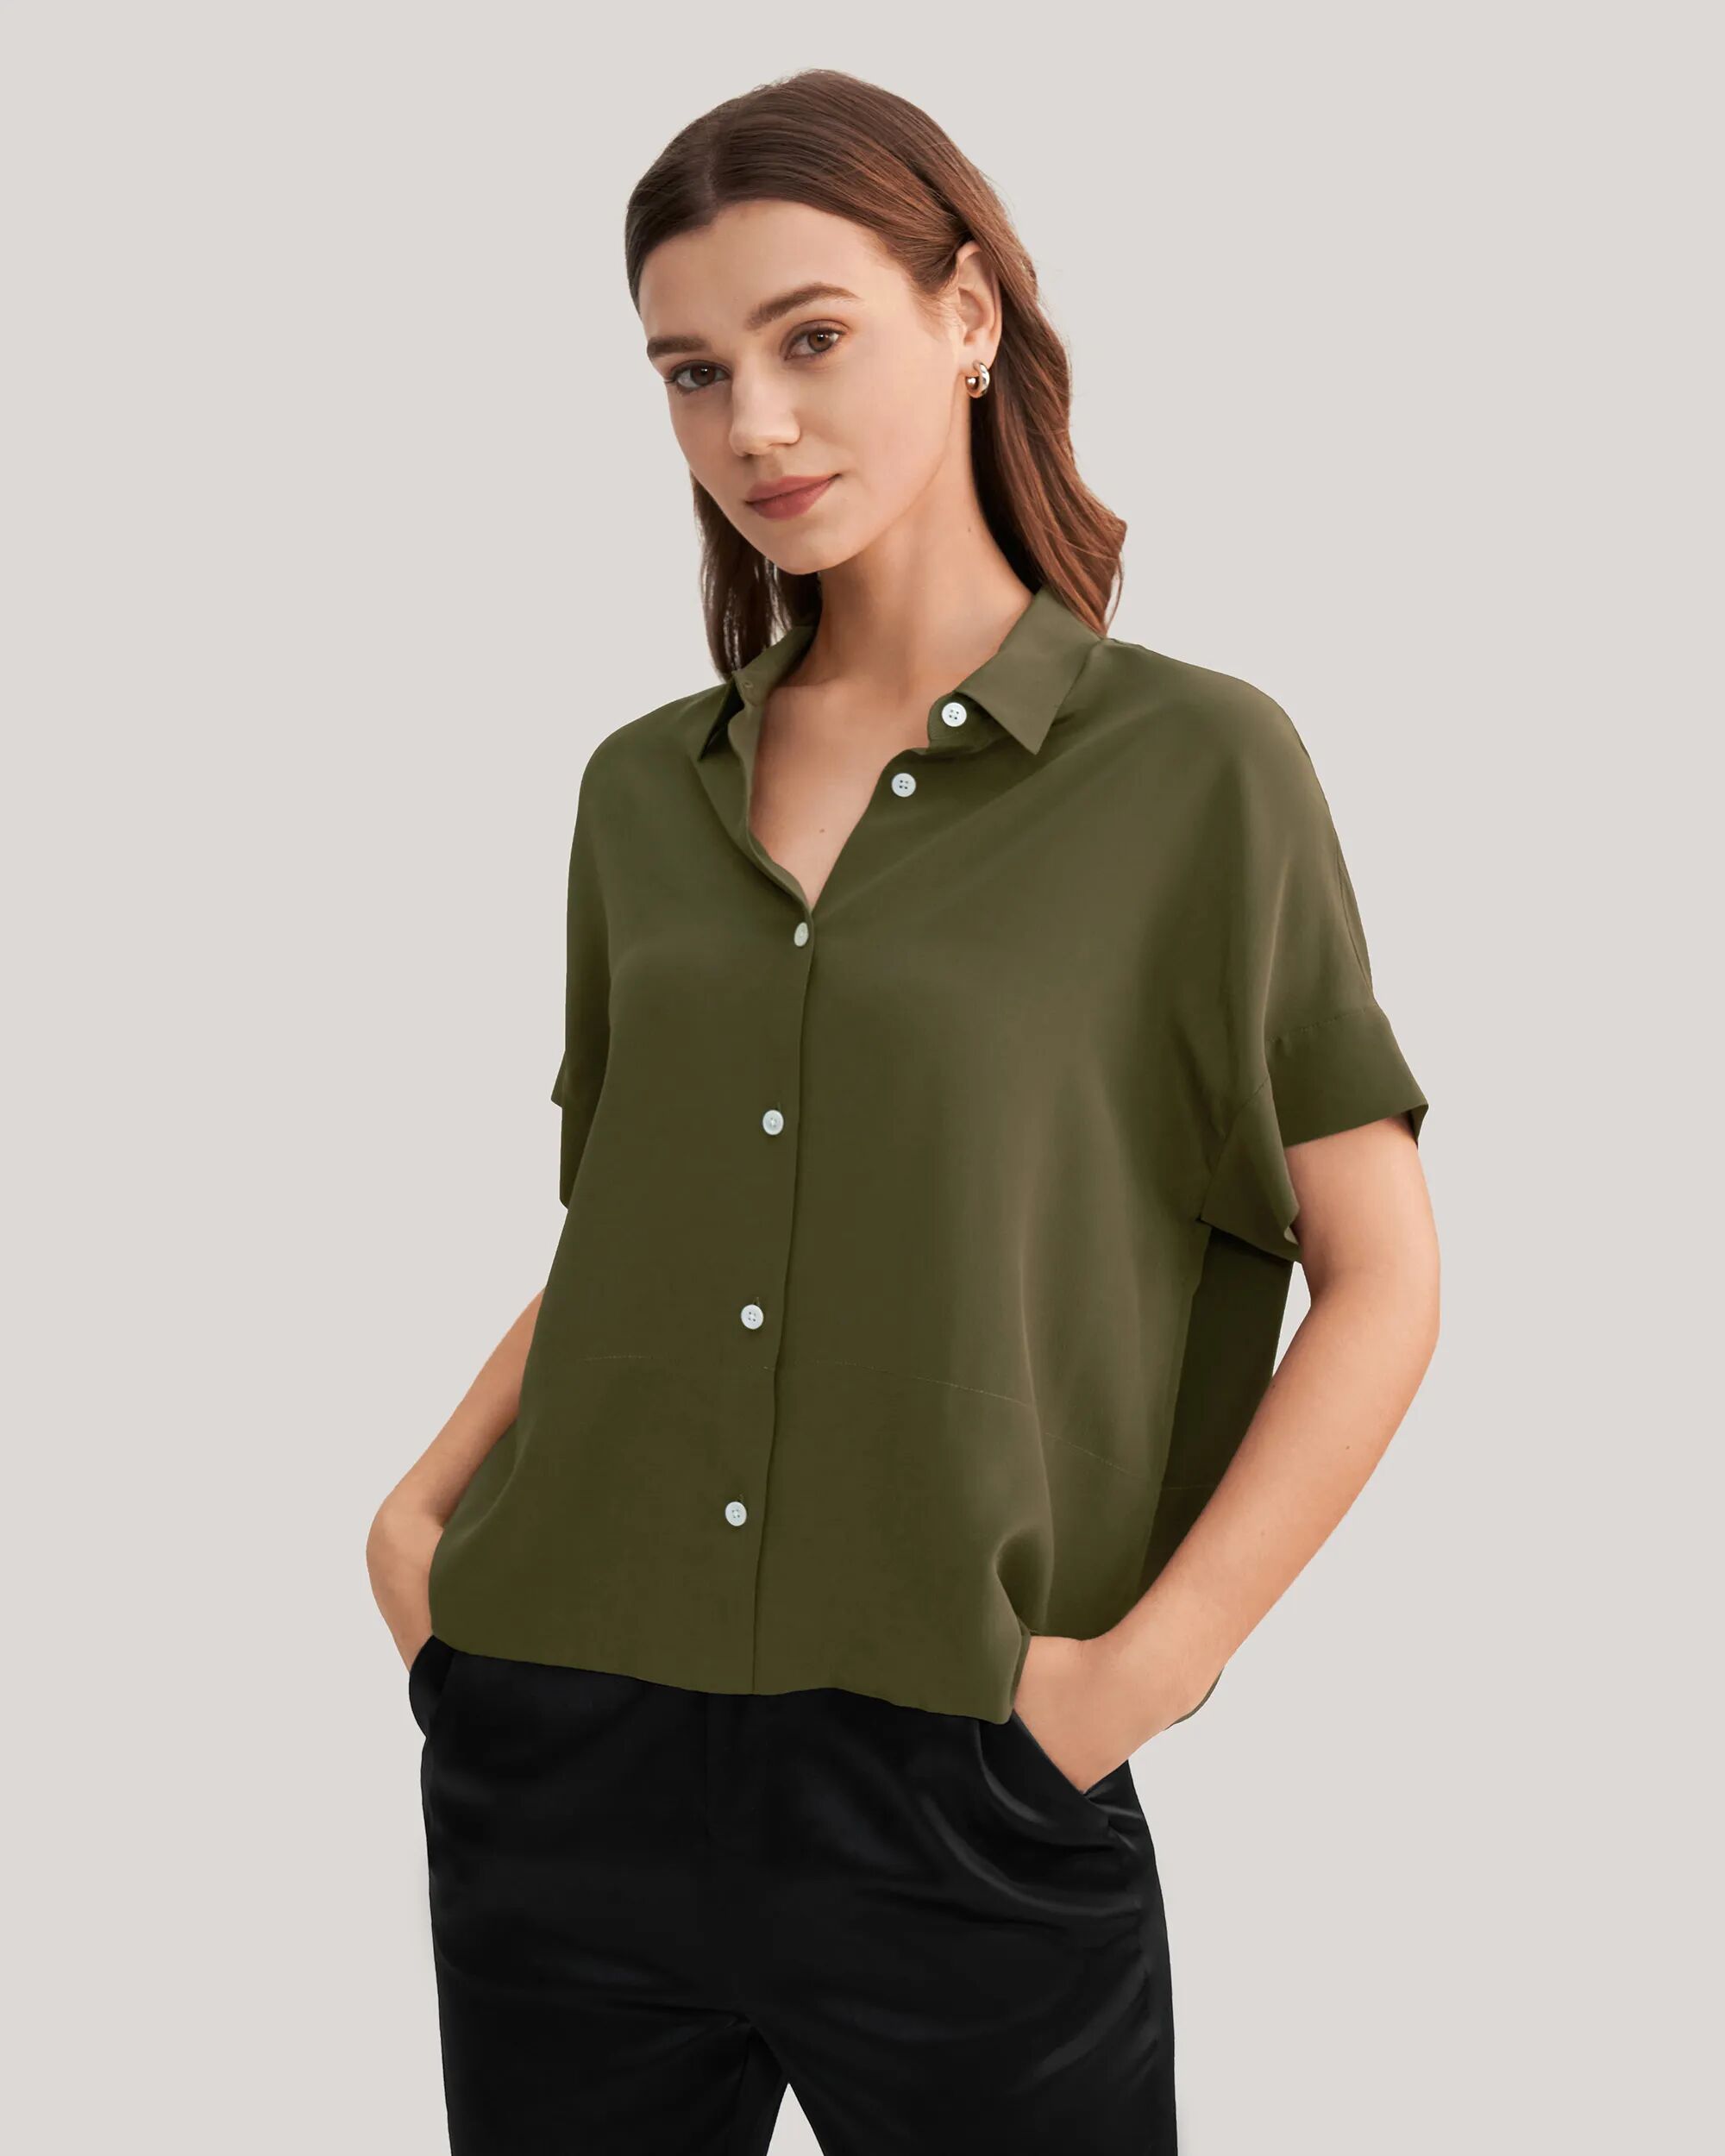 LILYSILK Womens Silk Shirts And Blouses High Quality Crepe De Chine Silk Tops Short Sleeve Silk Clothing Olive Green XXL